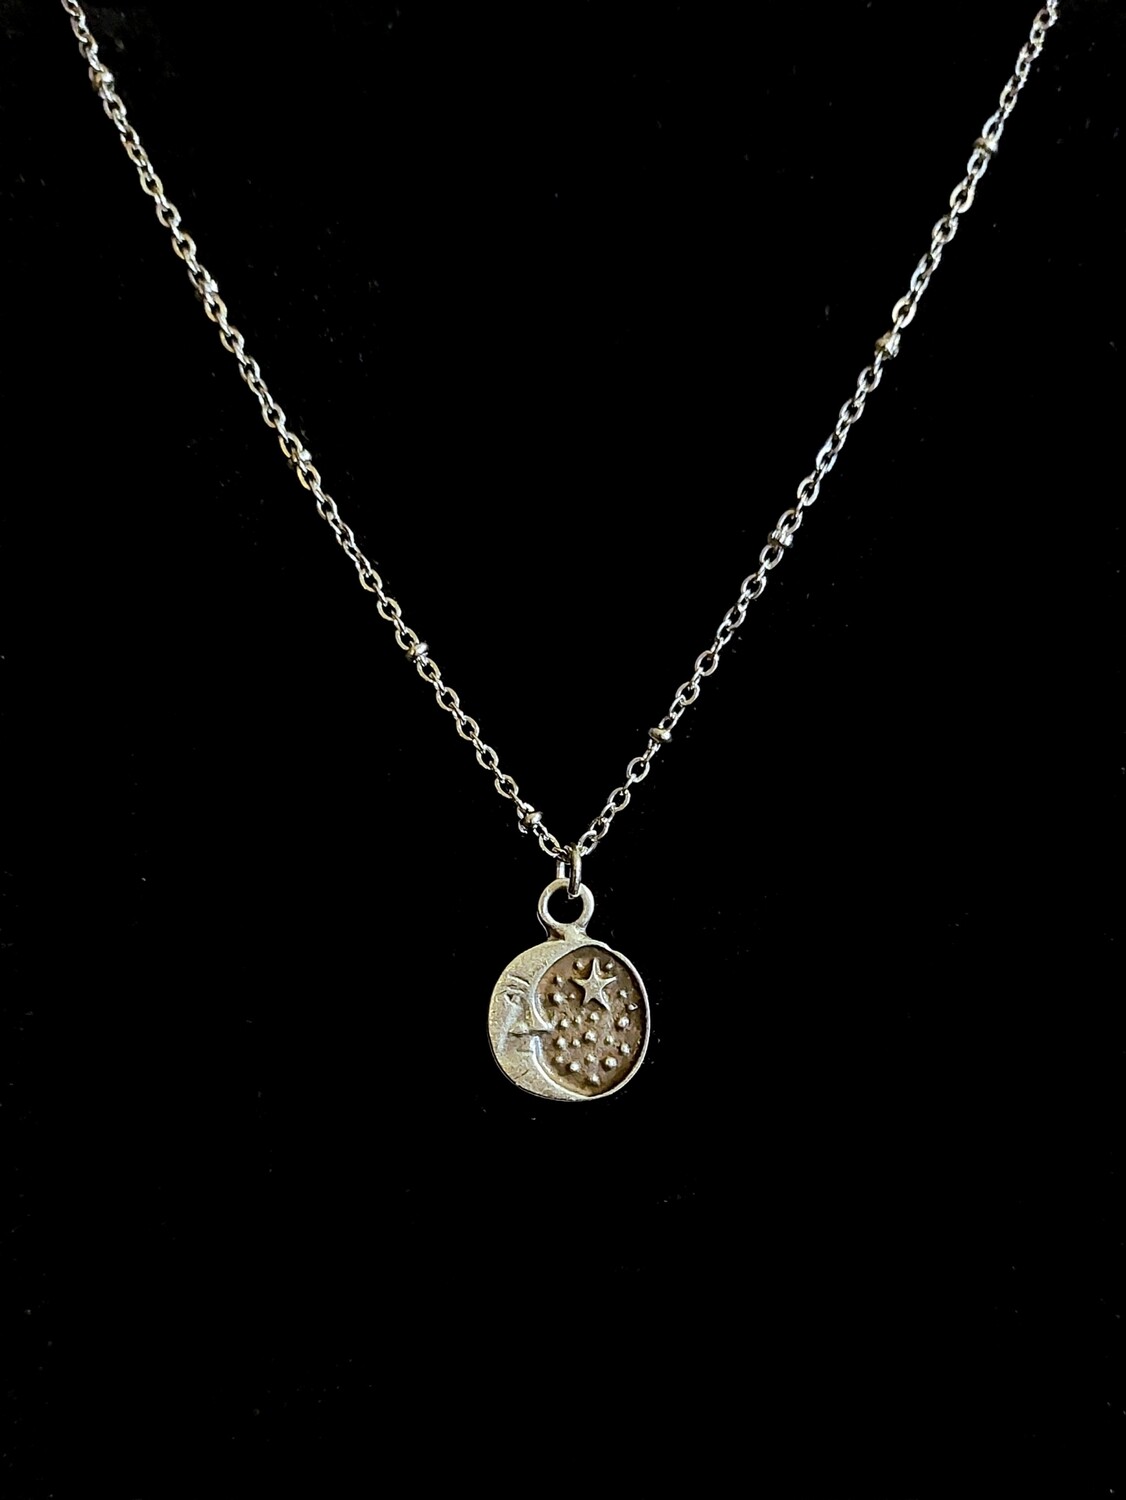 Antique Silver Starry Night Necklace